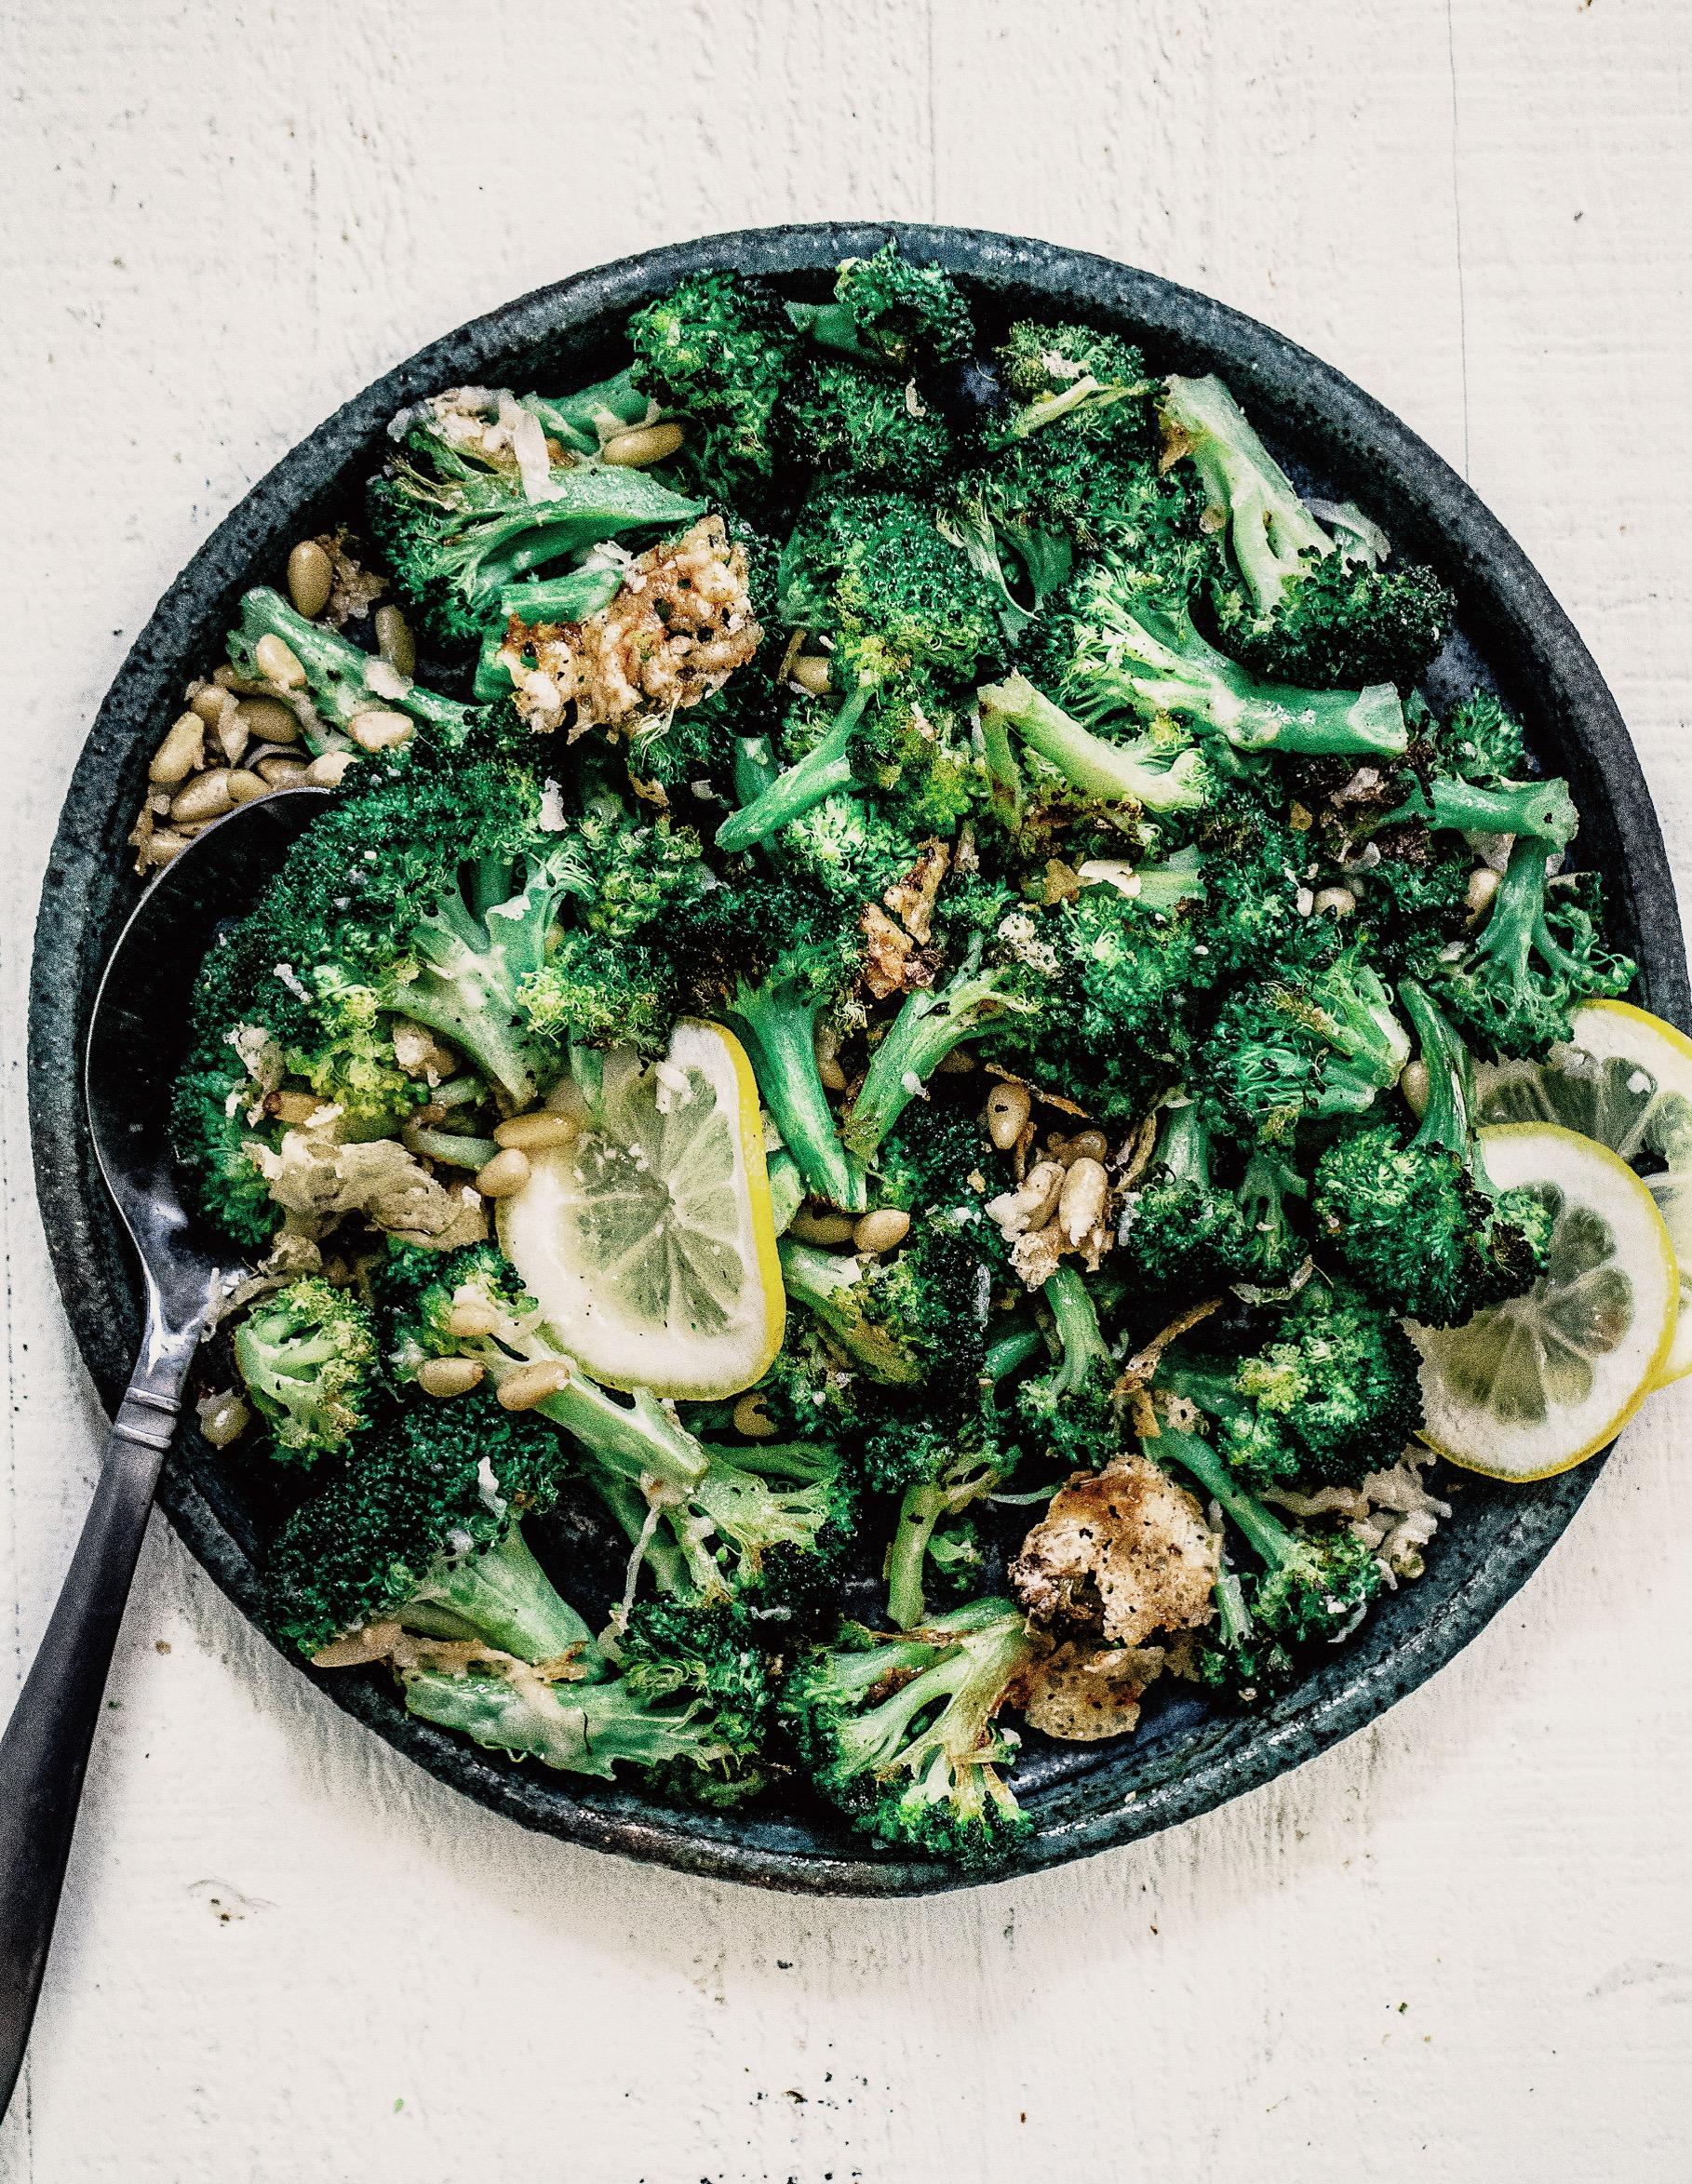 Best Roasted Broccoli with Crispy Parmesan & Pine Nuts